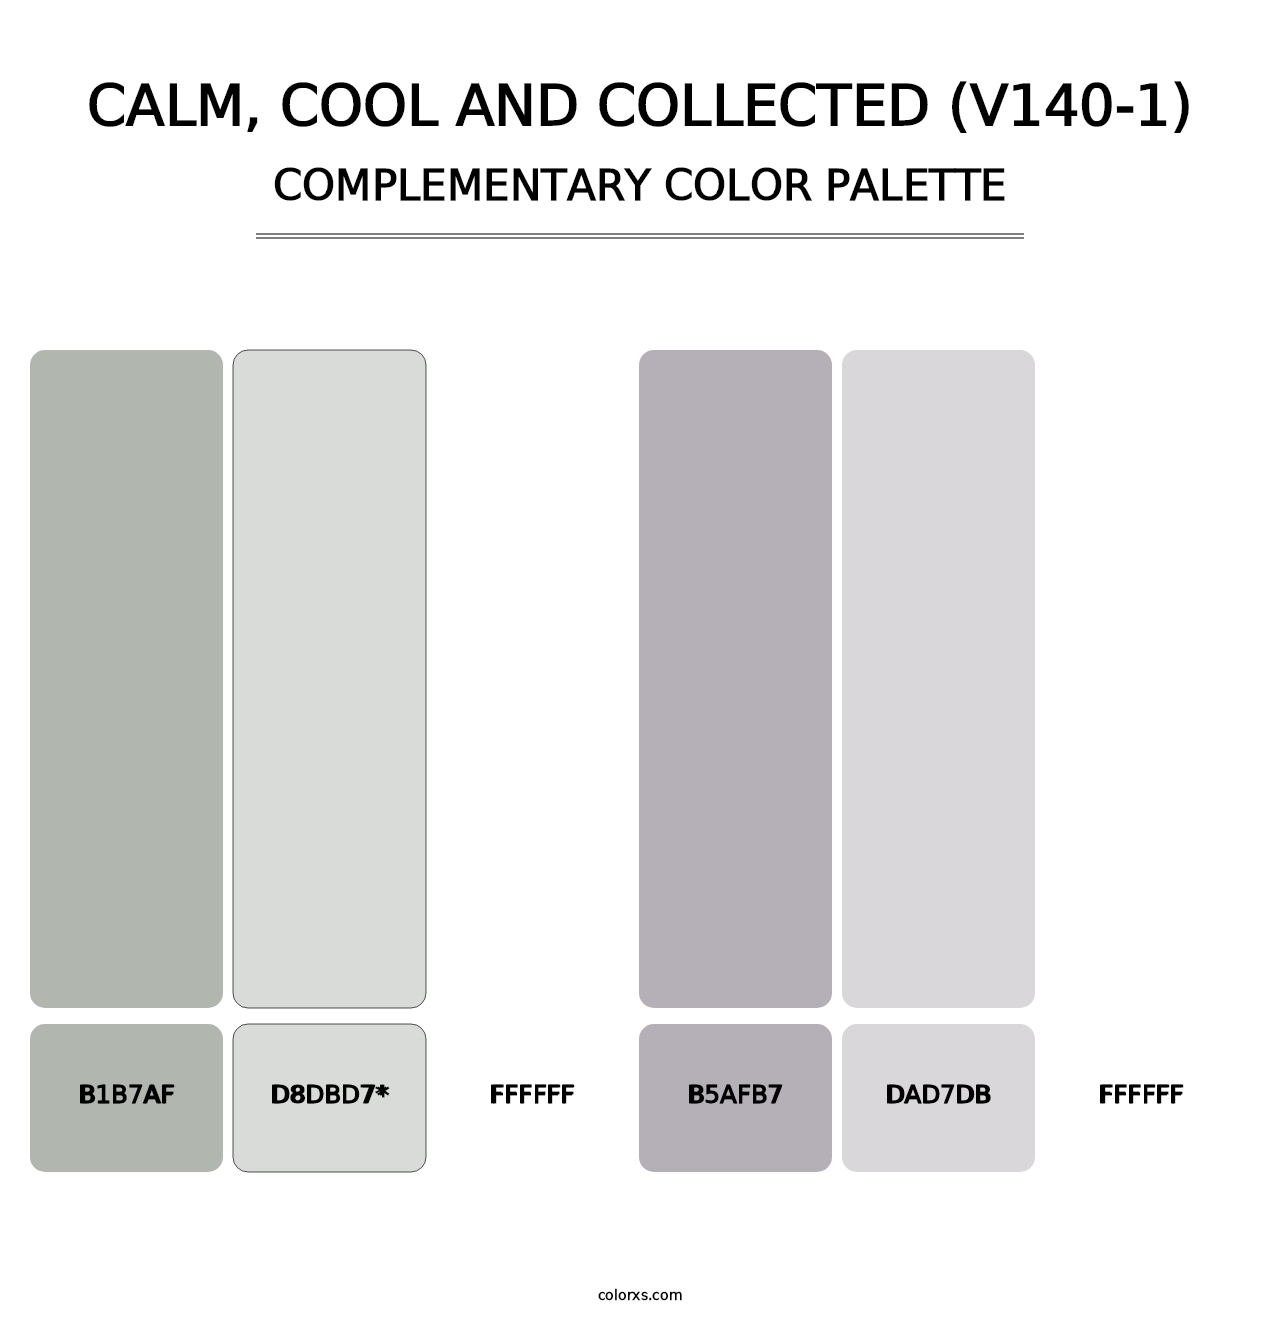 Calm, Cool and Collected (V140-1) - Complementary Color Palette